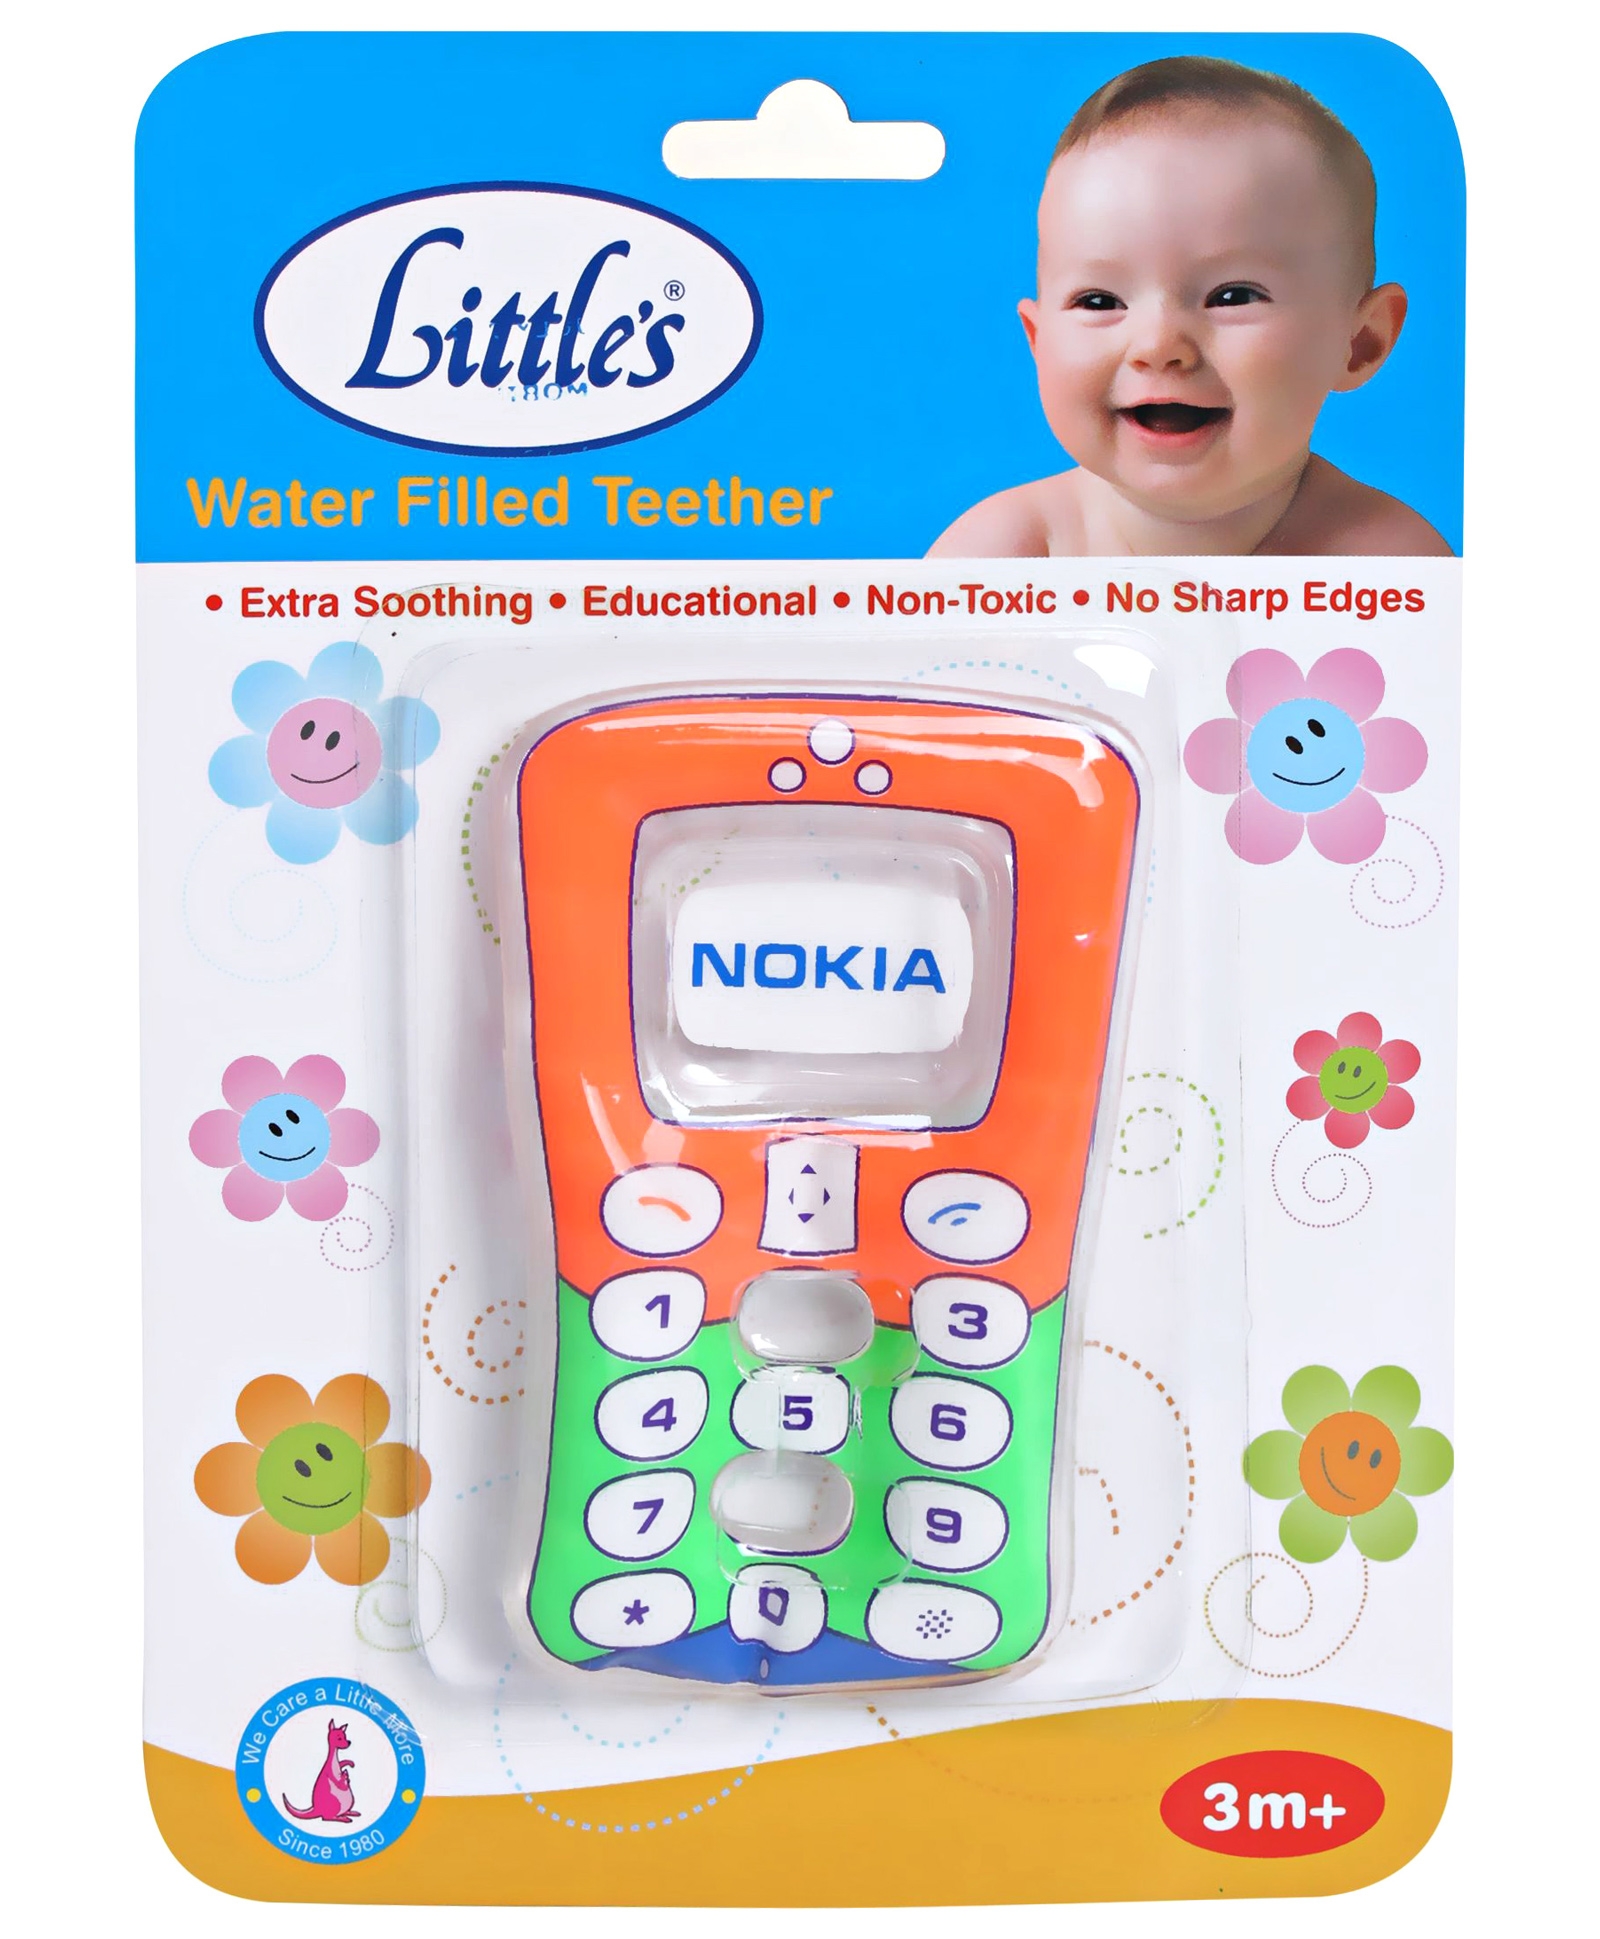 Little''s - Water Filled Teether - Mobile Phone